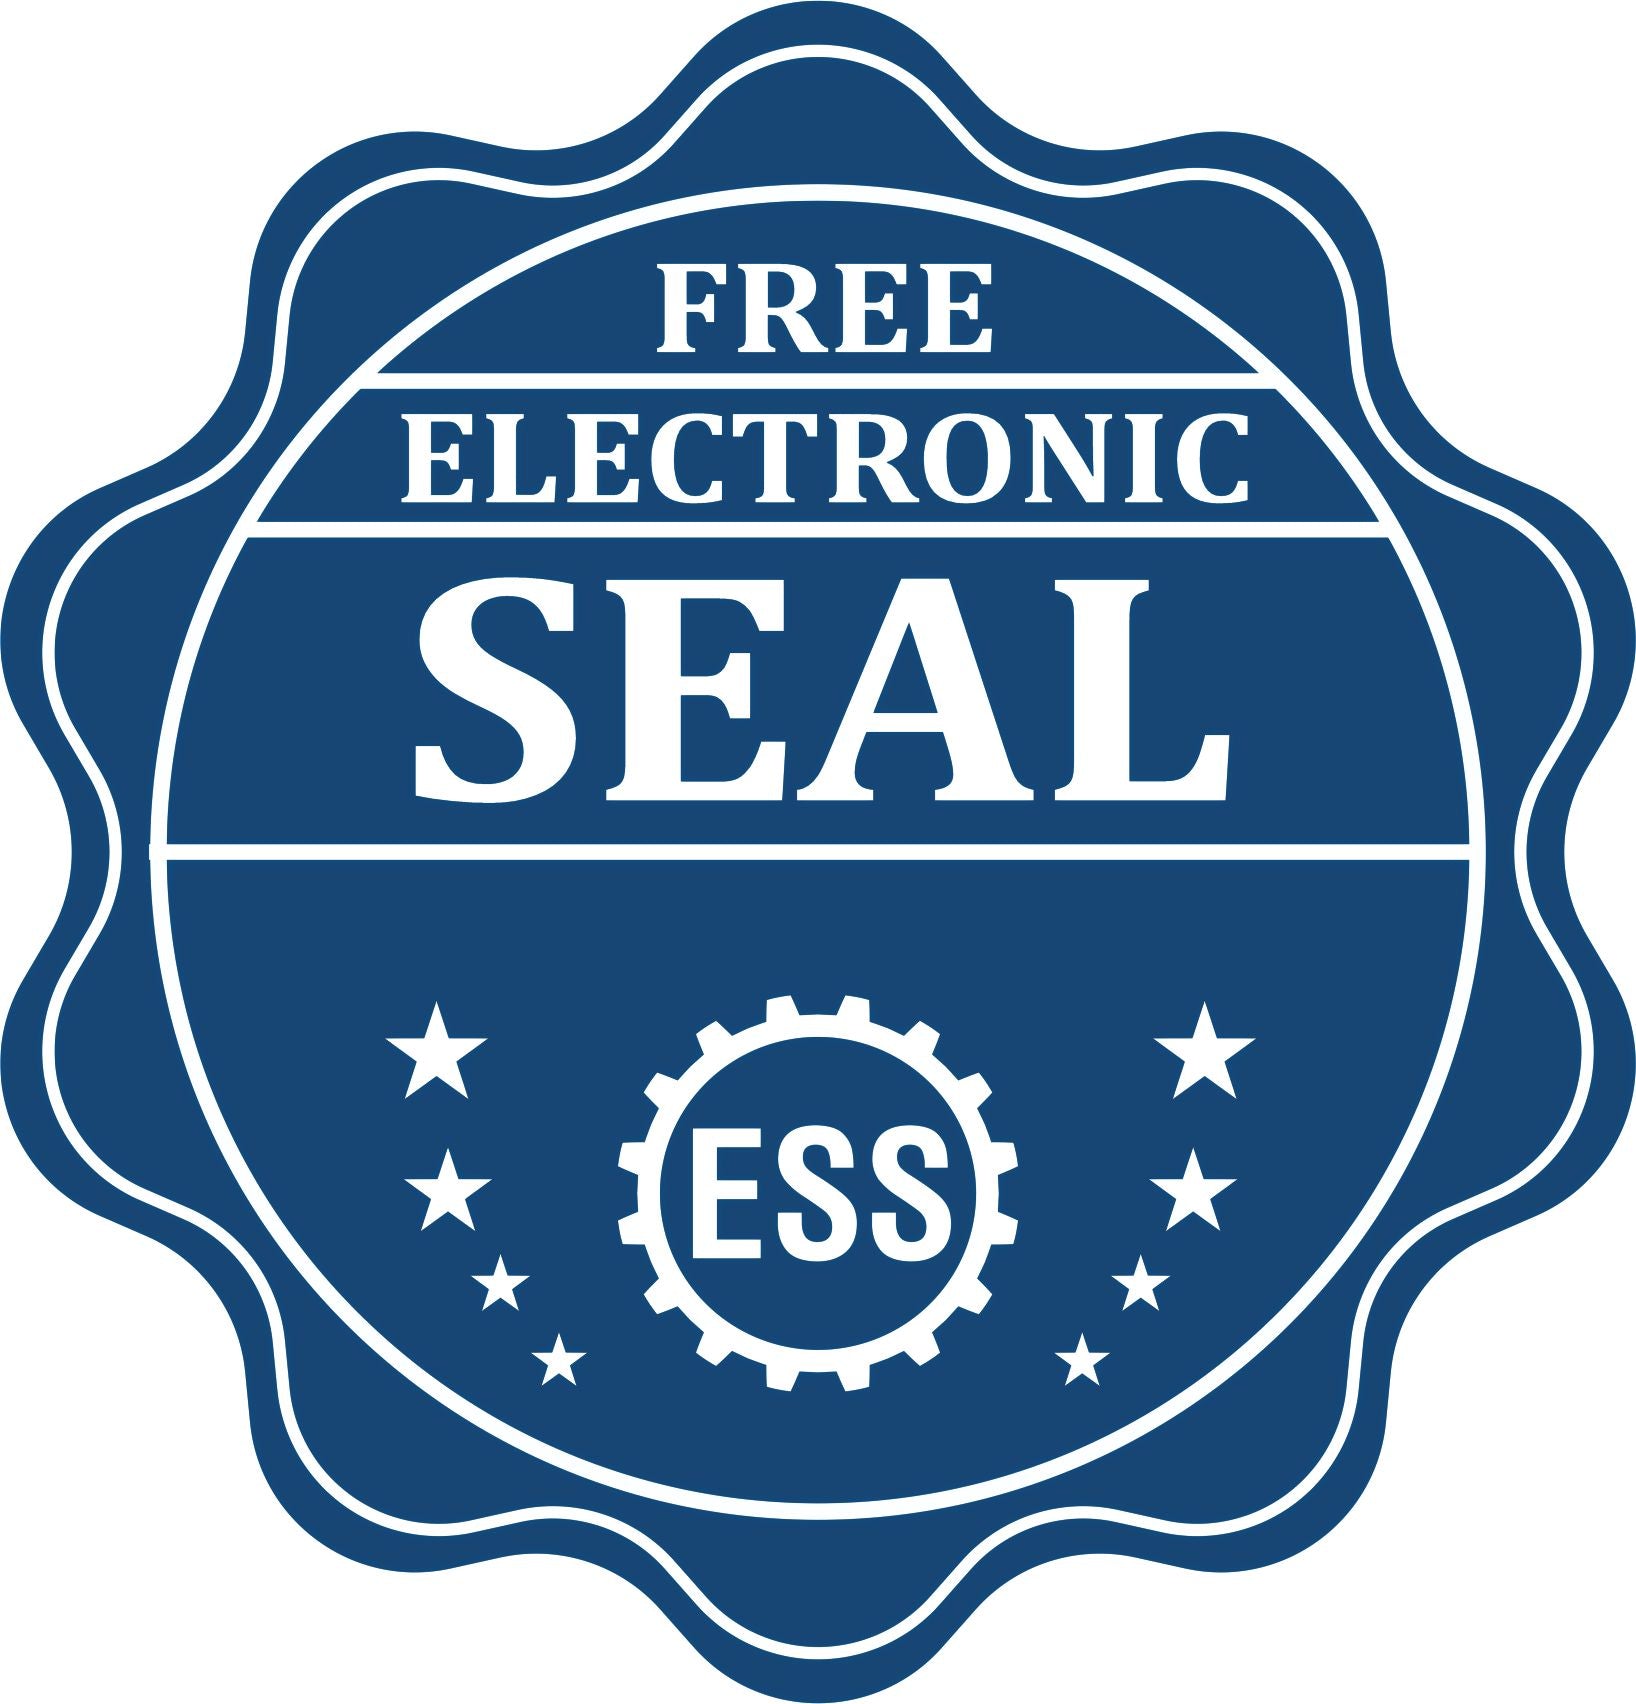 A badge showing a free electronic seal for the Long Reach Ohio PE Seal with stars and the ESS gear on the emblem.